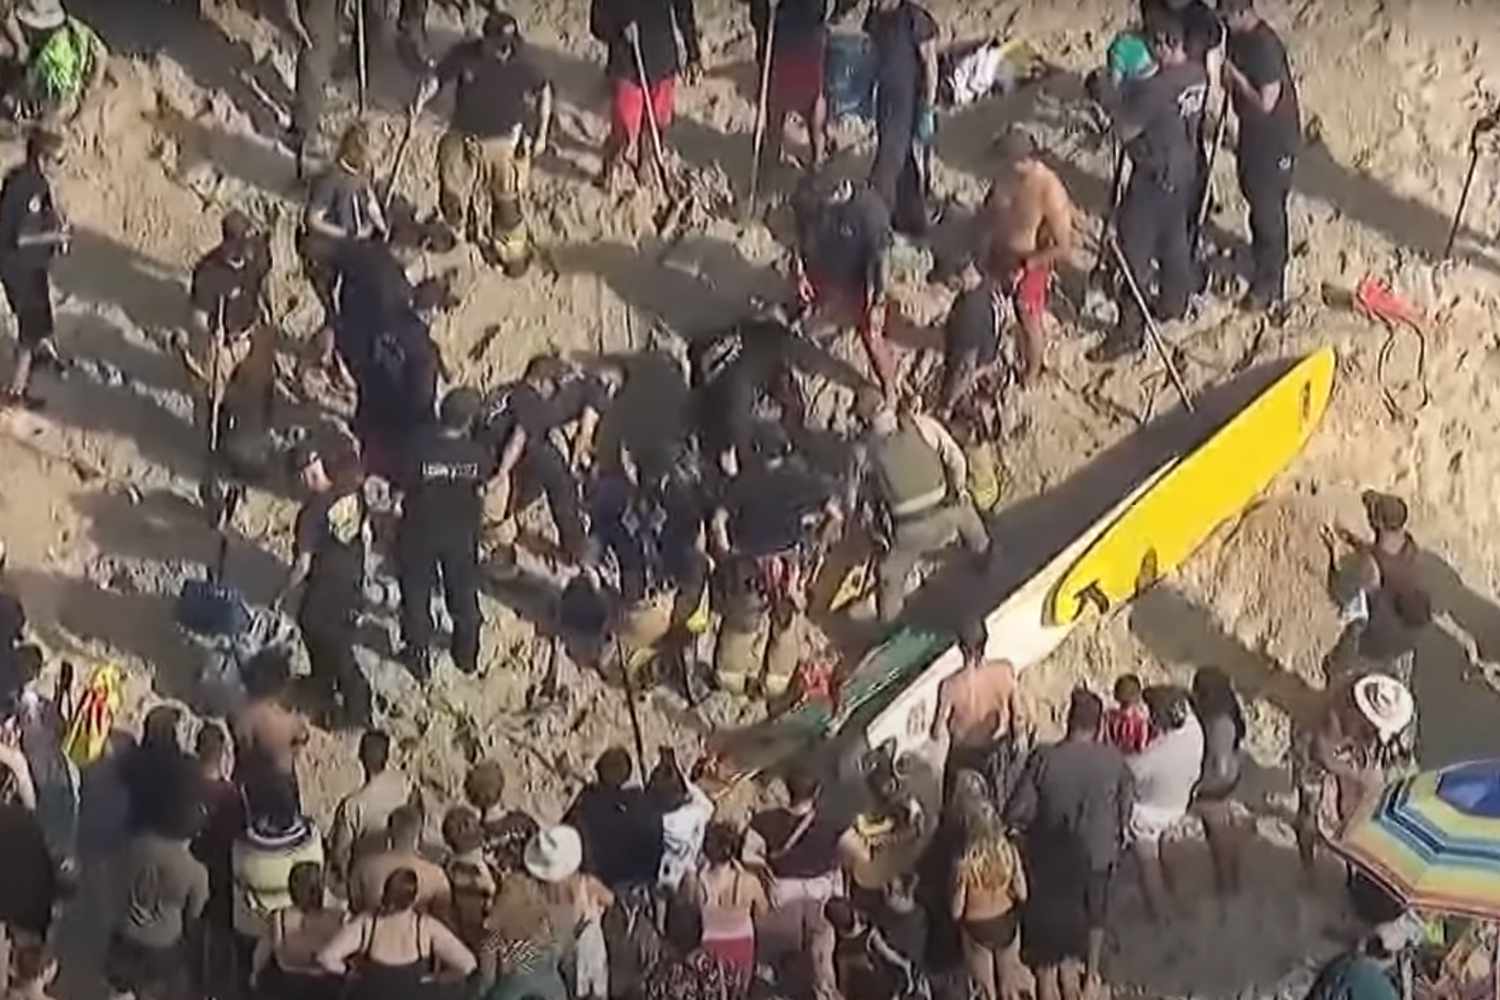 16-Year-Old Girl Rescued After Getting 'Buried Up to Her Neck' in Sand Hole on San Diego Beach